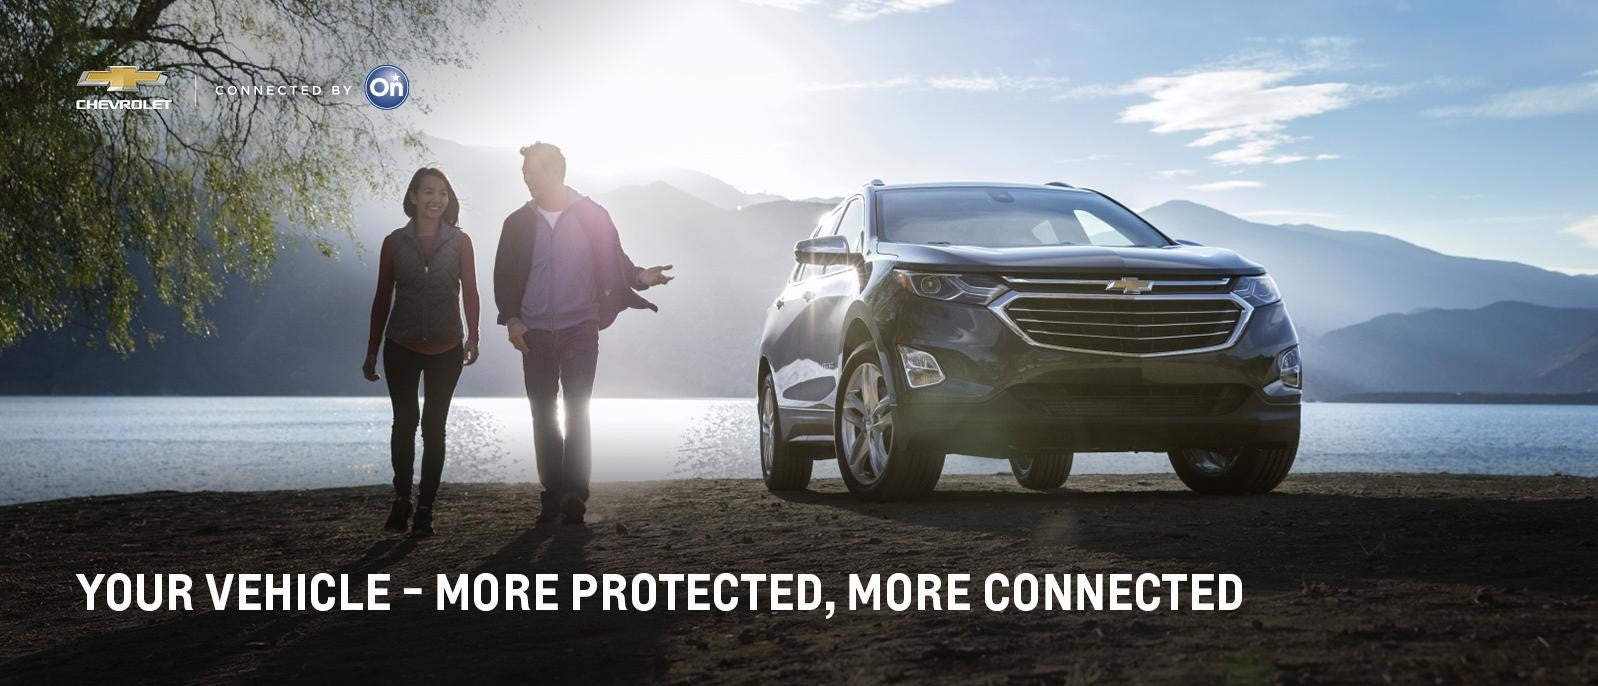 Your Vehicle - More Protected, More Connected